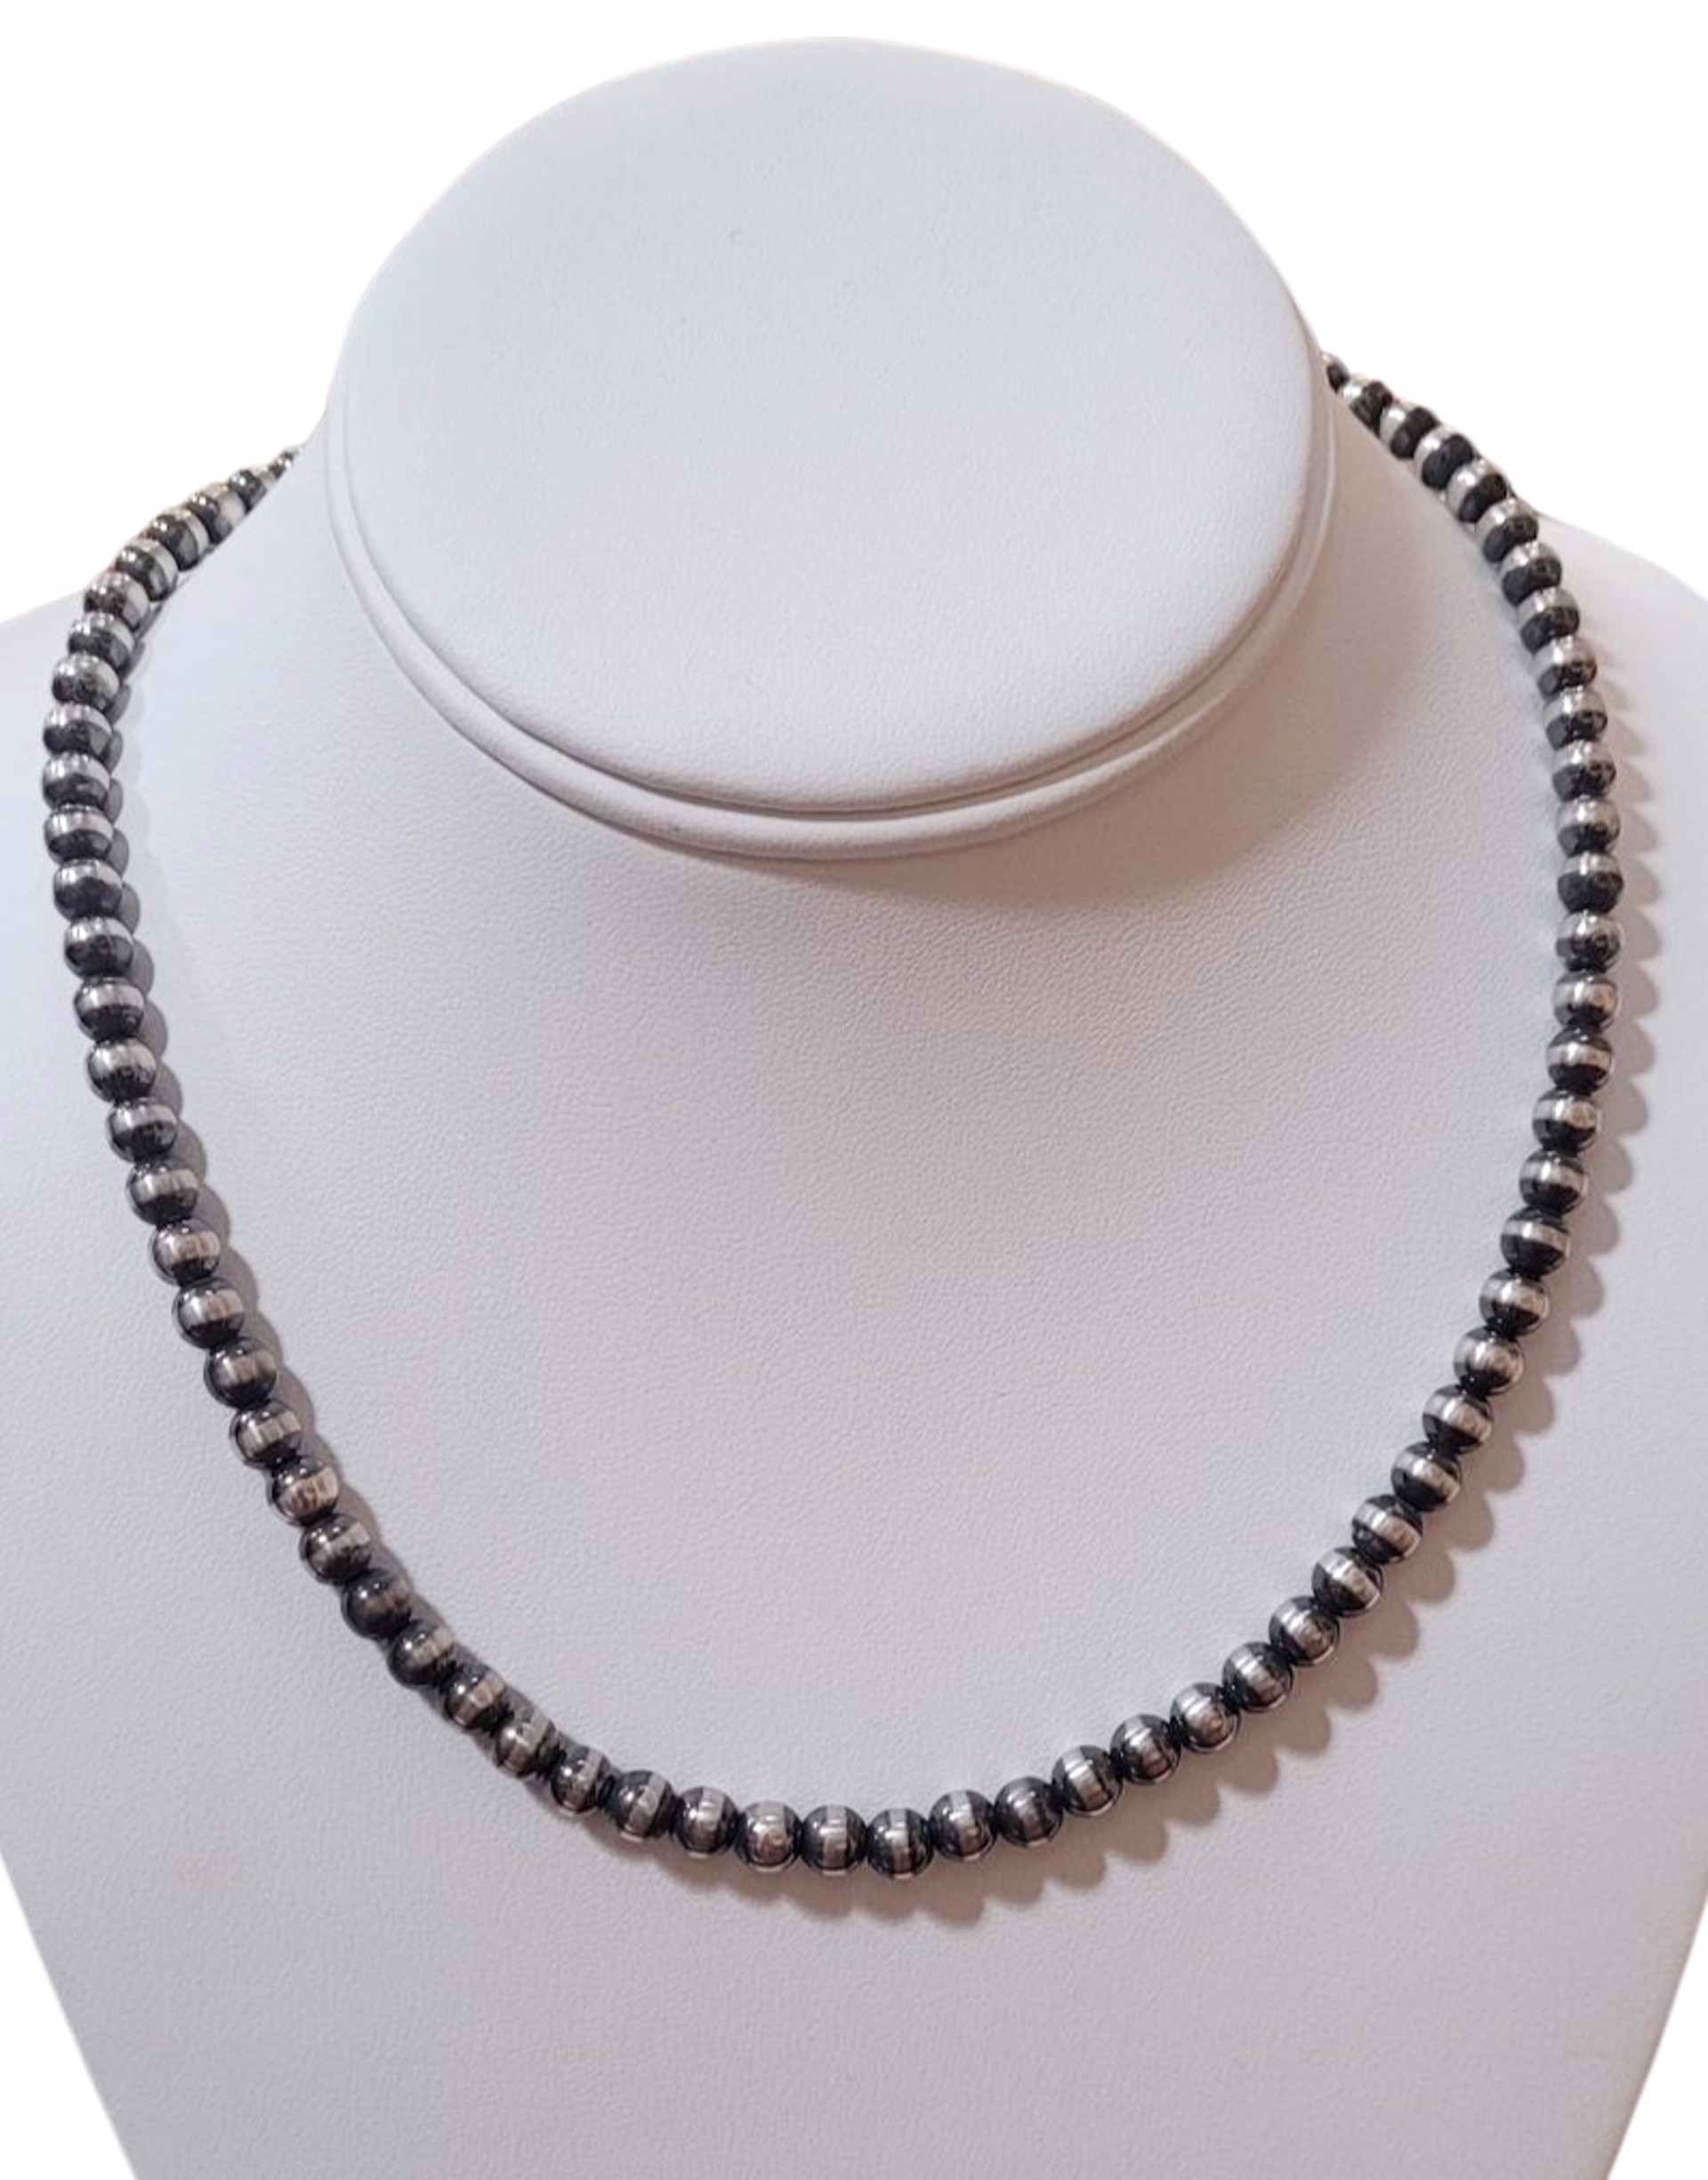 Necklace - Sterling Silver Pearls 18" 6mm by Indigo Desert Ranch - Jewelry